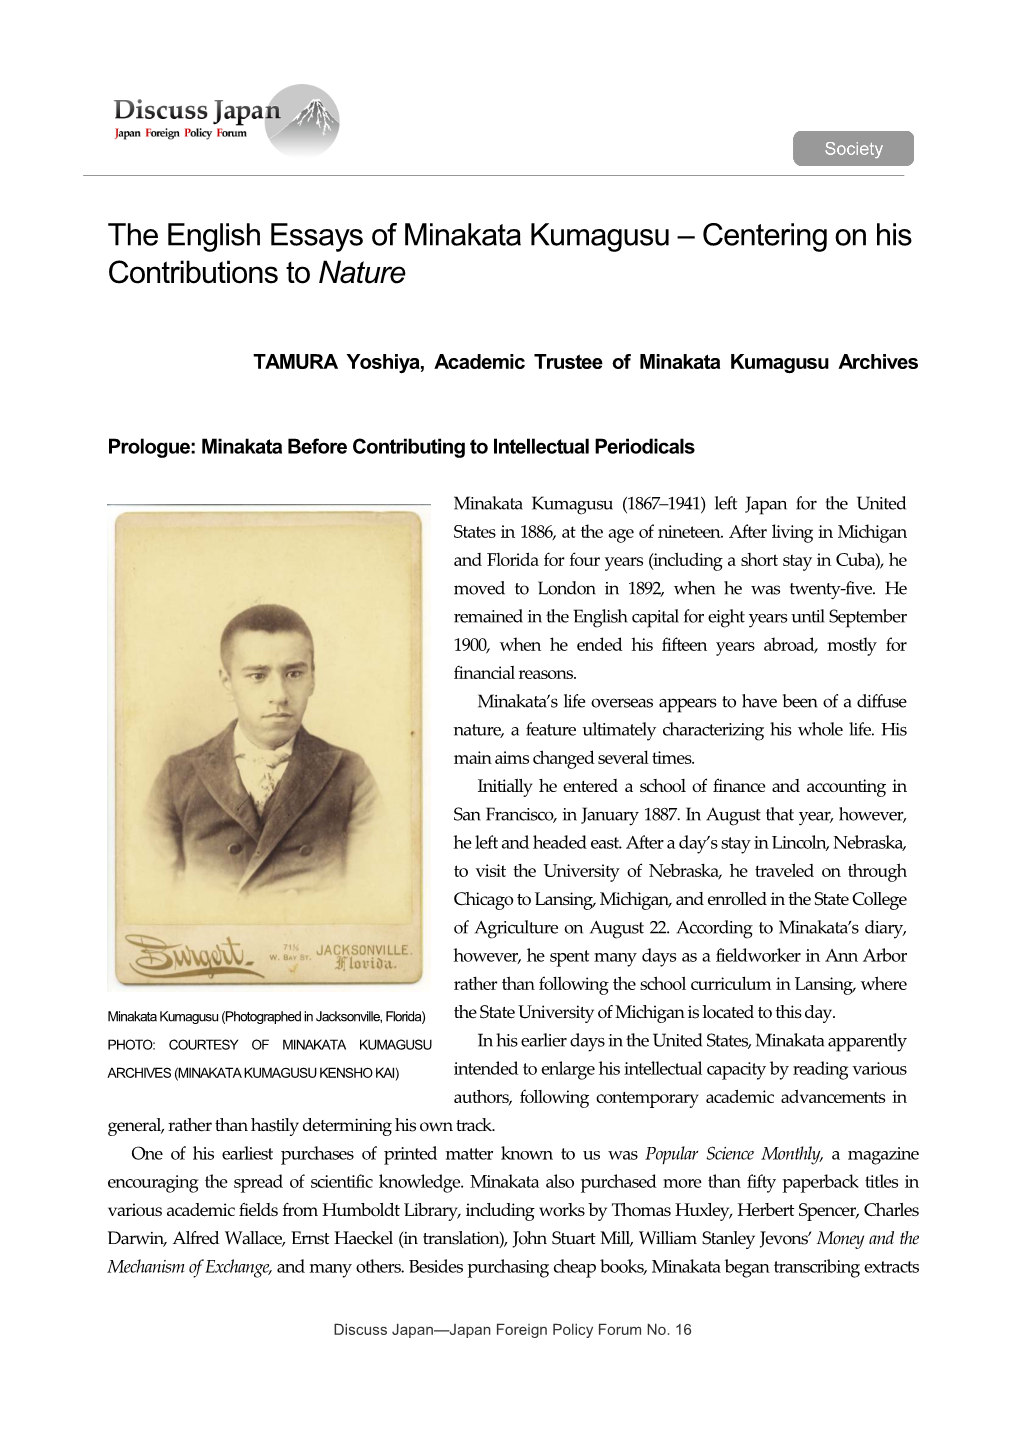 The English Essays of Minakata Kumagusu – Centering on His Contributions to Nature